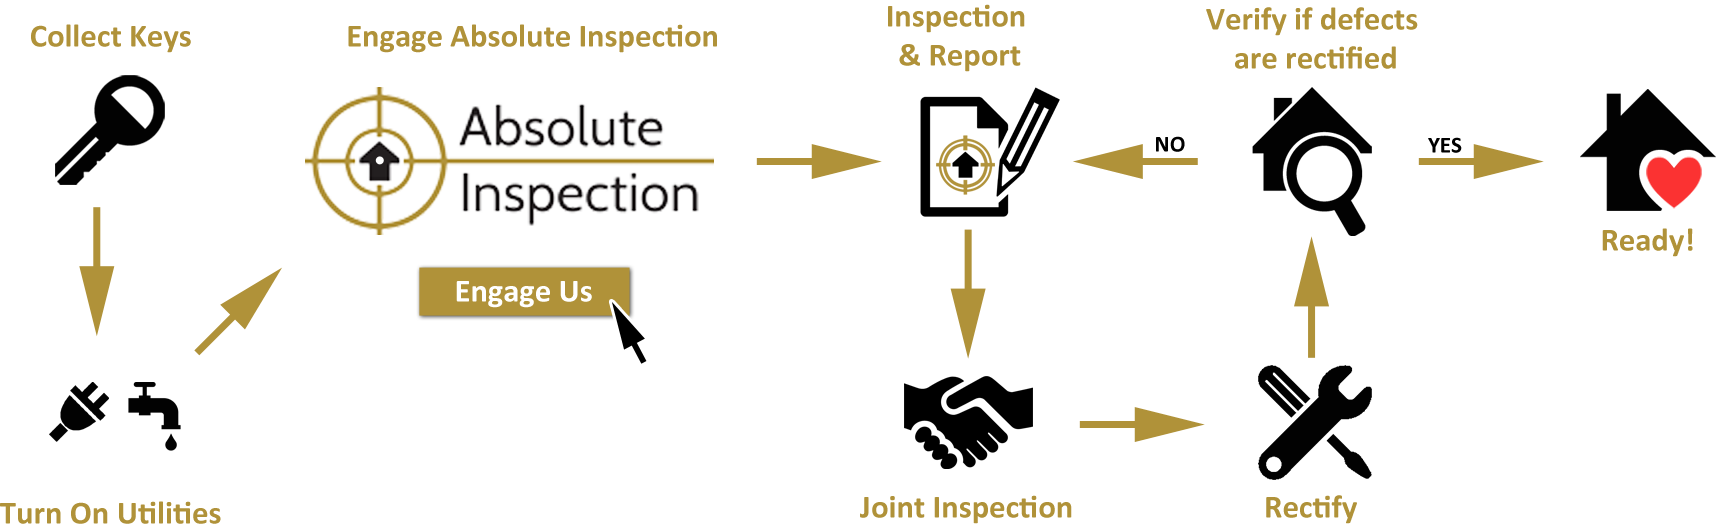 Defect Inspections Absolute Inspection